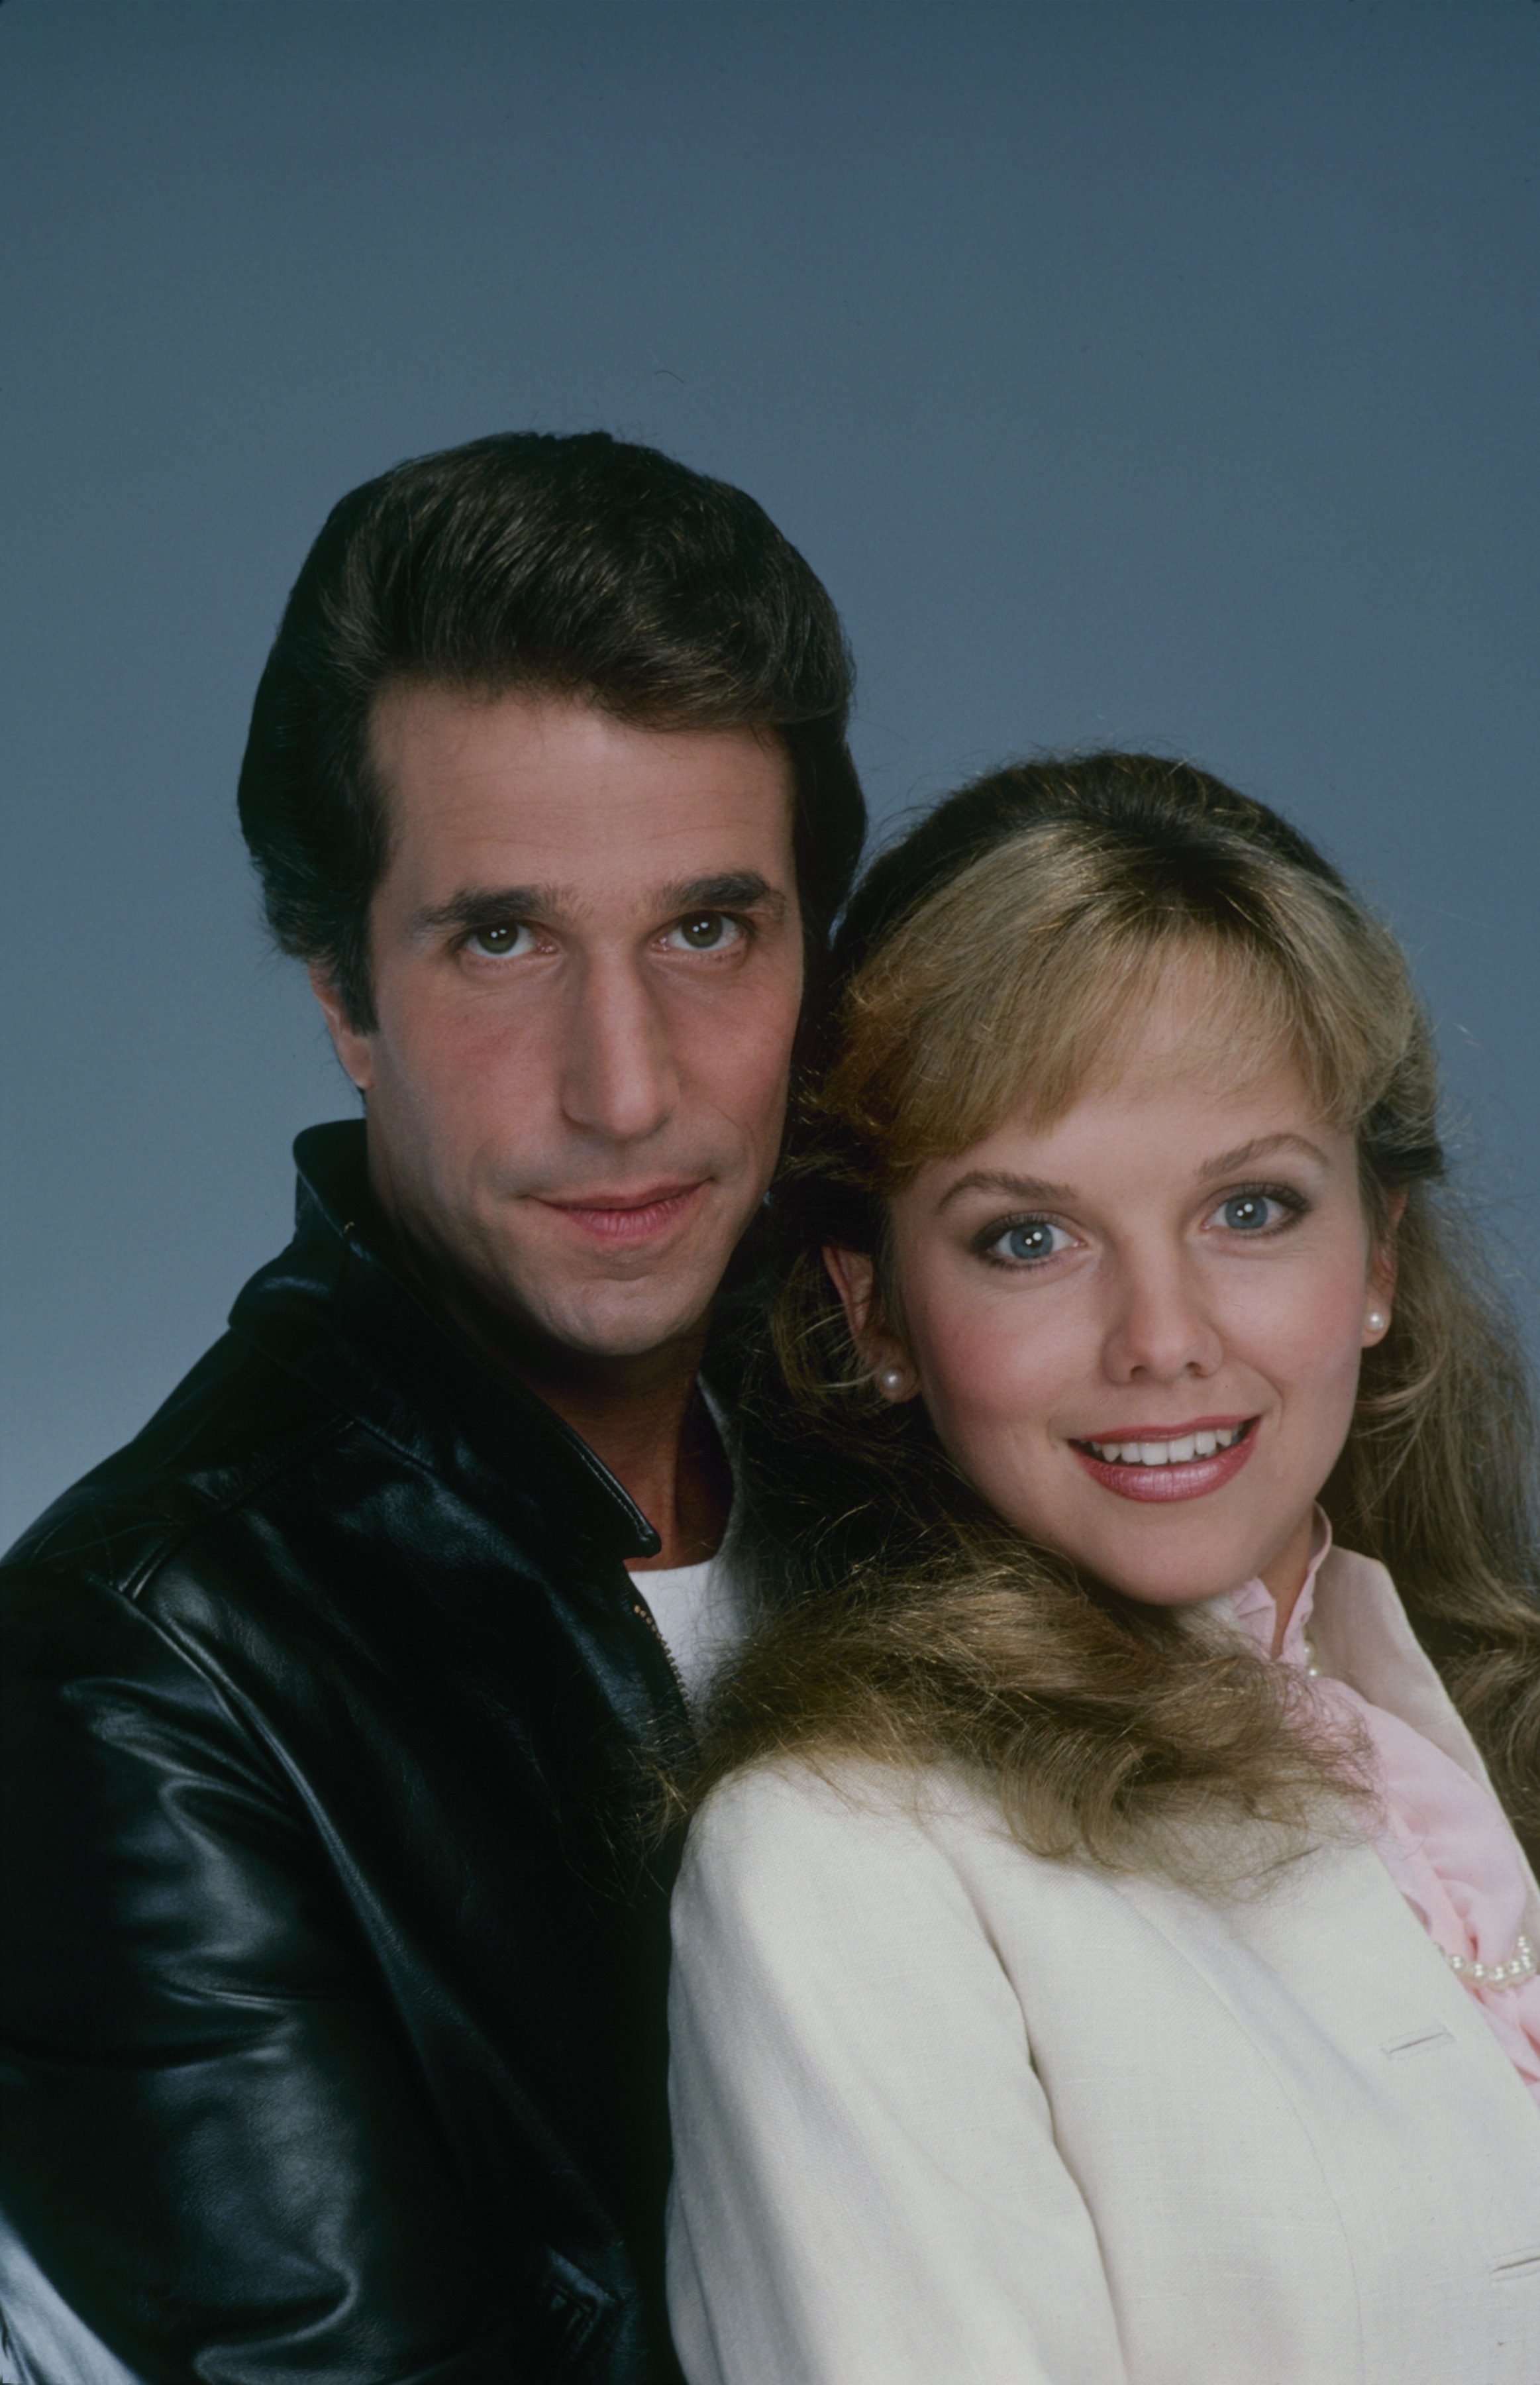 Henry Winkler and Linda Purl as The Fonz and Ashley Pfister from "Happy Days" in 1982 | Source: Getty Images